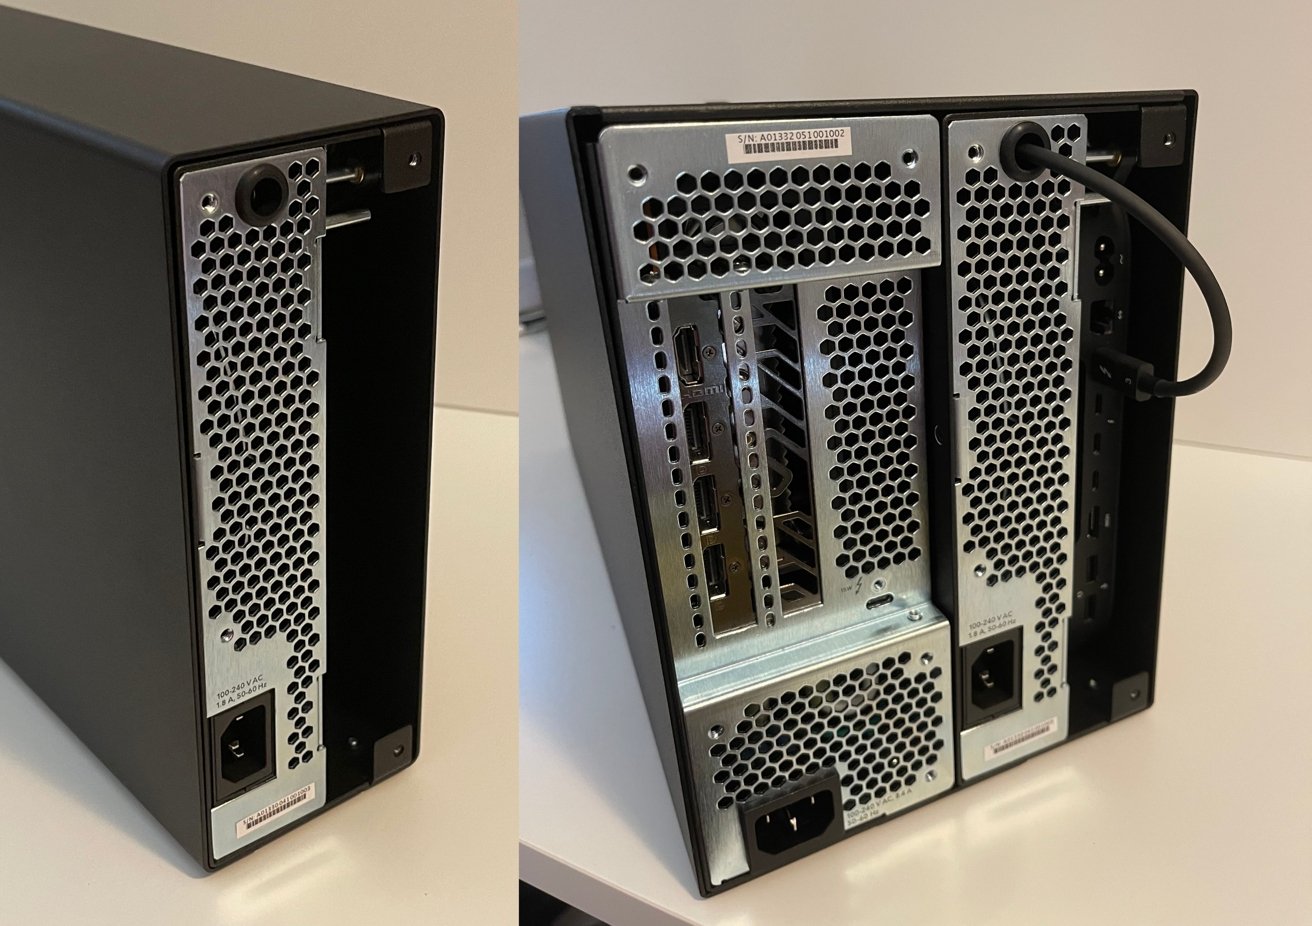 The rear of both desktop enclosures filled with enclosures. The entire back panel of the Mac mini is easily accessible once installed in its module. 